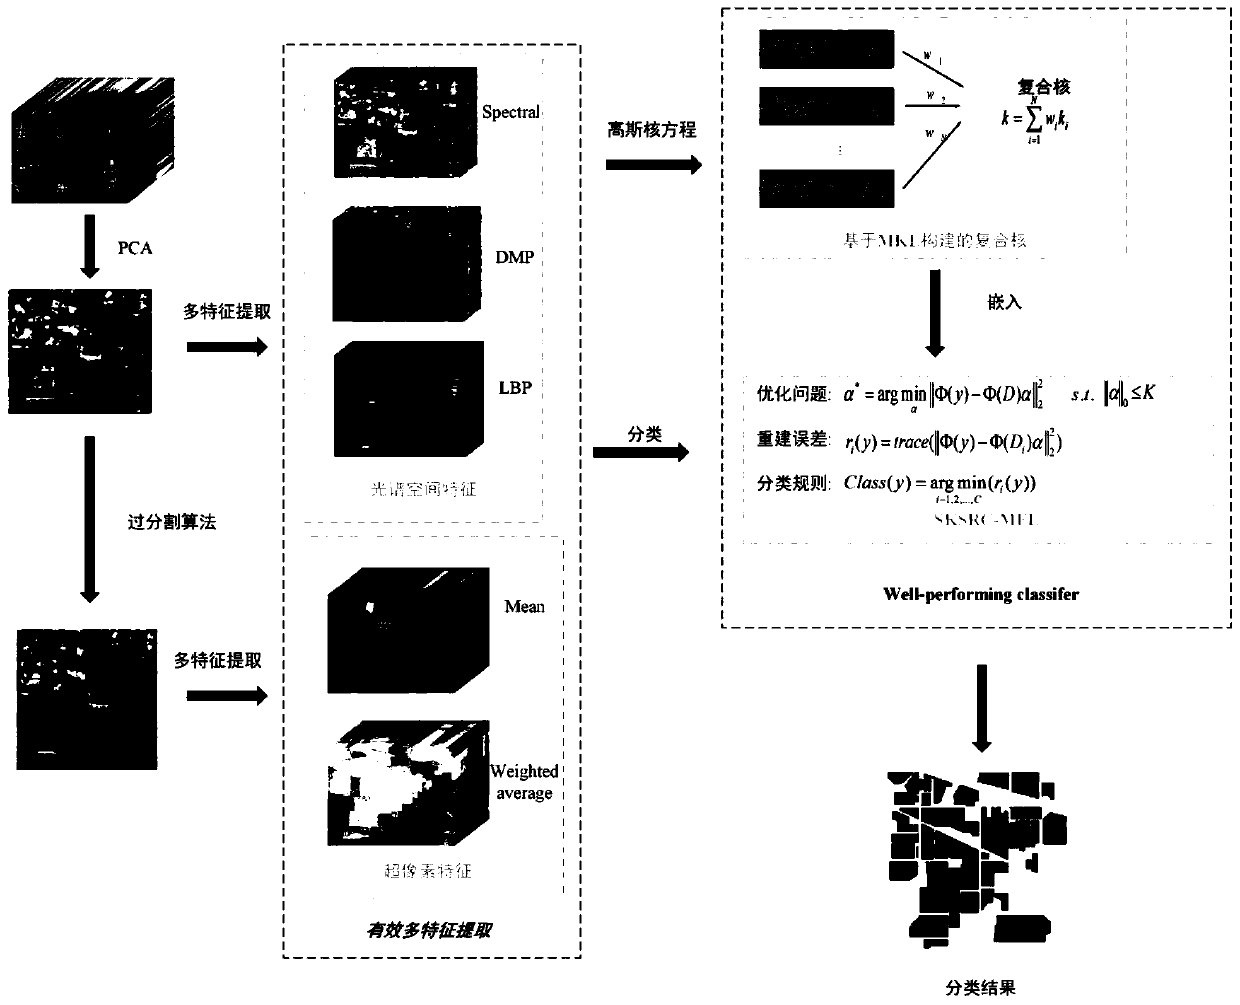 Hyperspectral image joint classification method based on multi-feature learning and superpixel kernel sparse representation